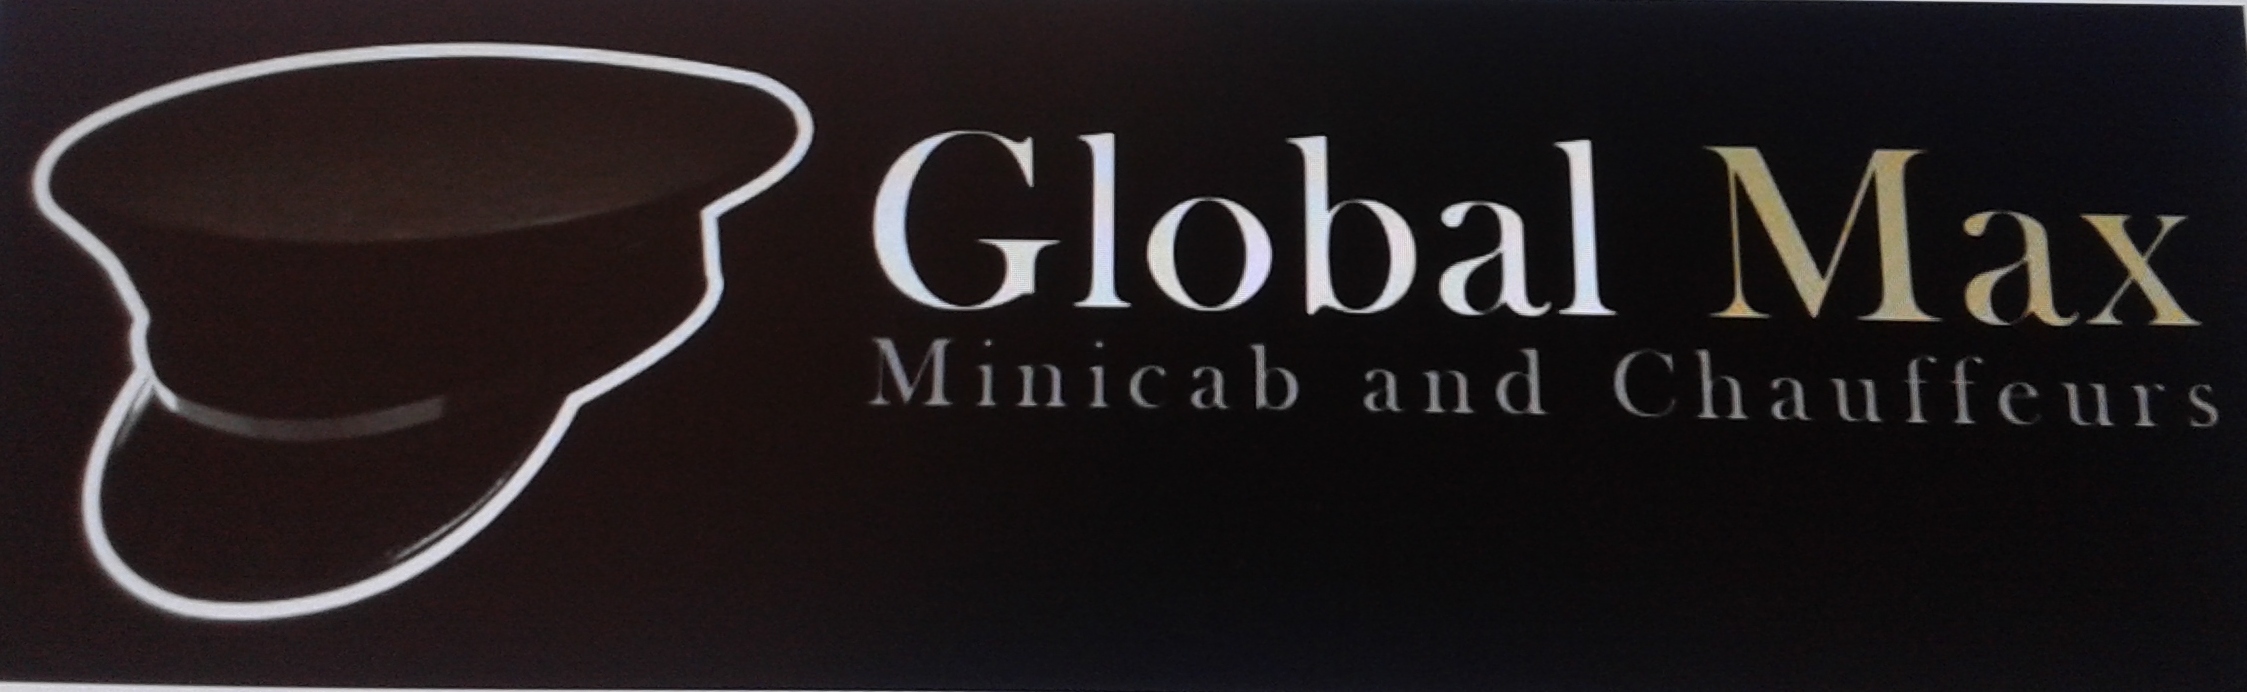 Logo of Global Max Minicab and Chauffeurs Airport Transfer And Transportation Services In London